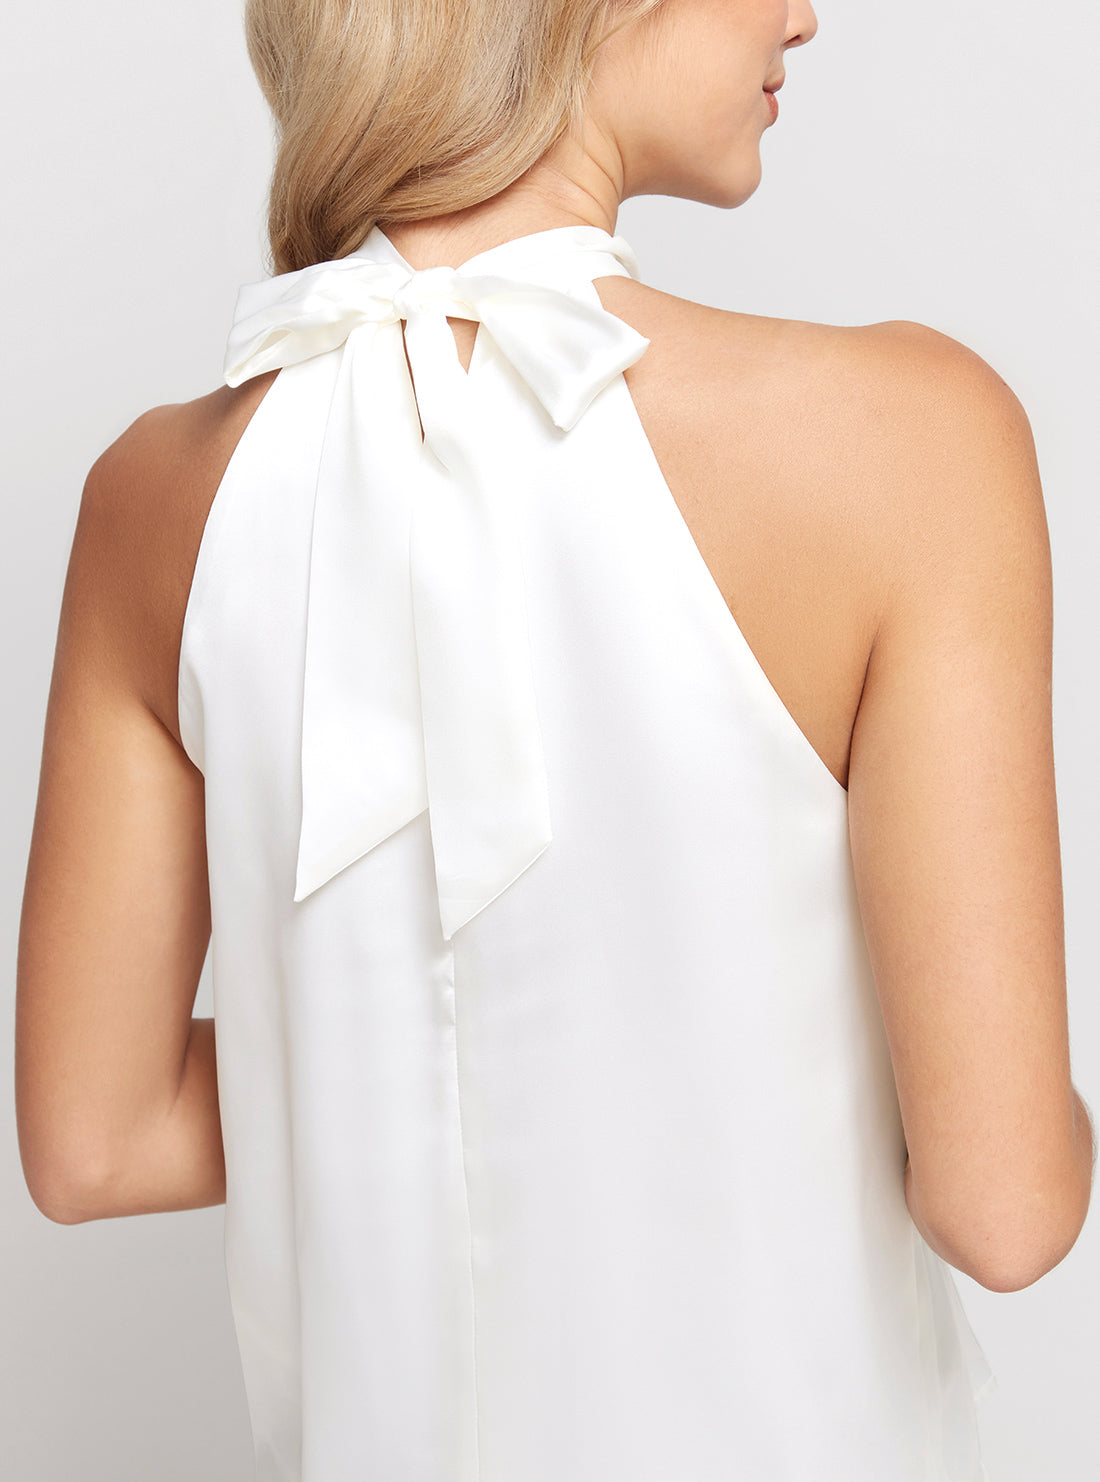 GUESS Marciano White Erika Halter Neck Top detail view